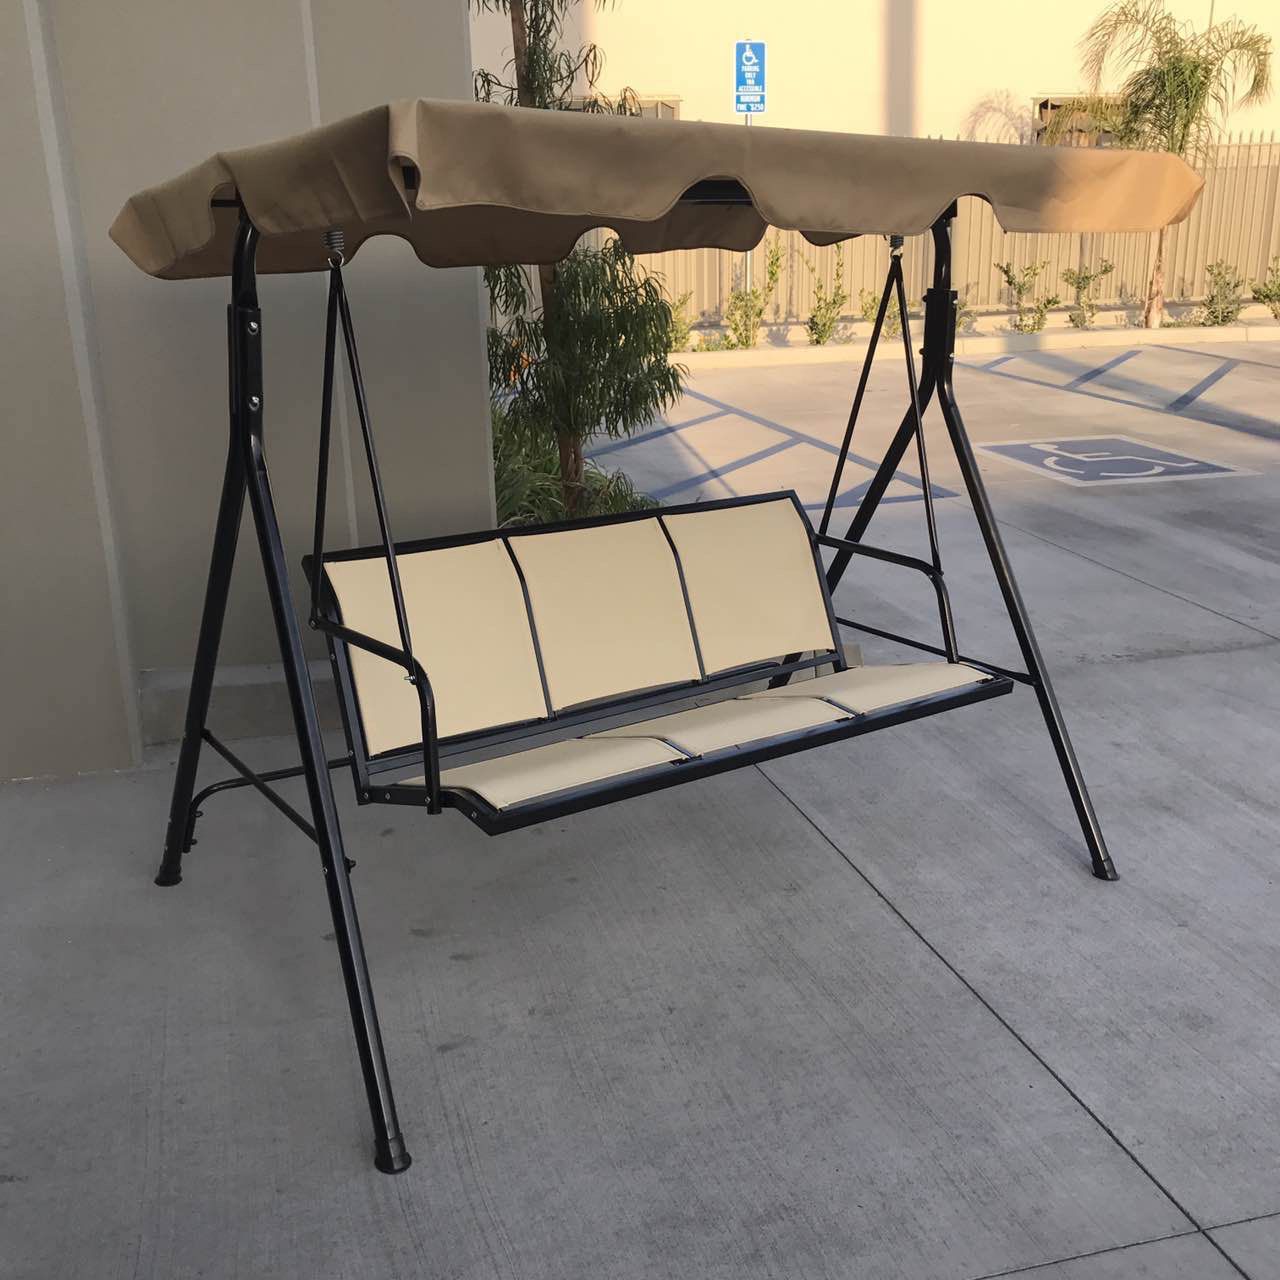 New in box $90 each 528 lbs capacity porch swing bench chair with canopy sun shade sun blocker